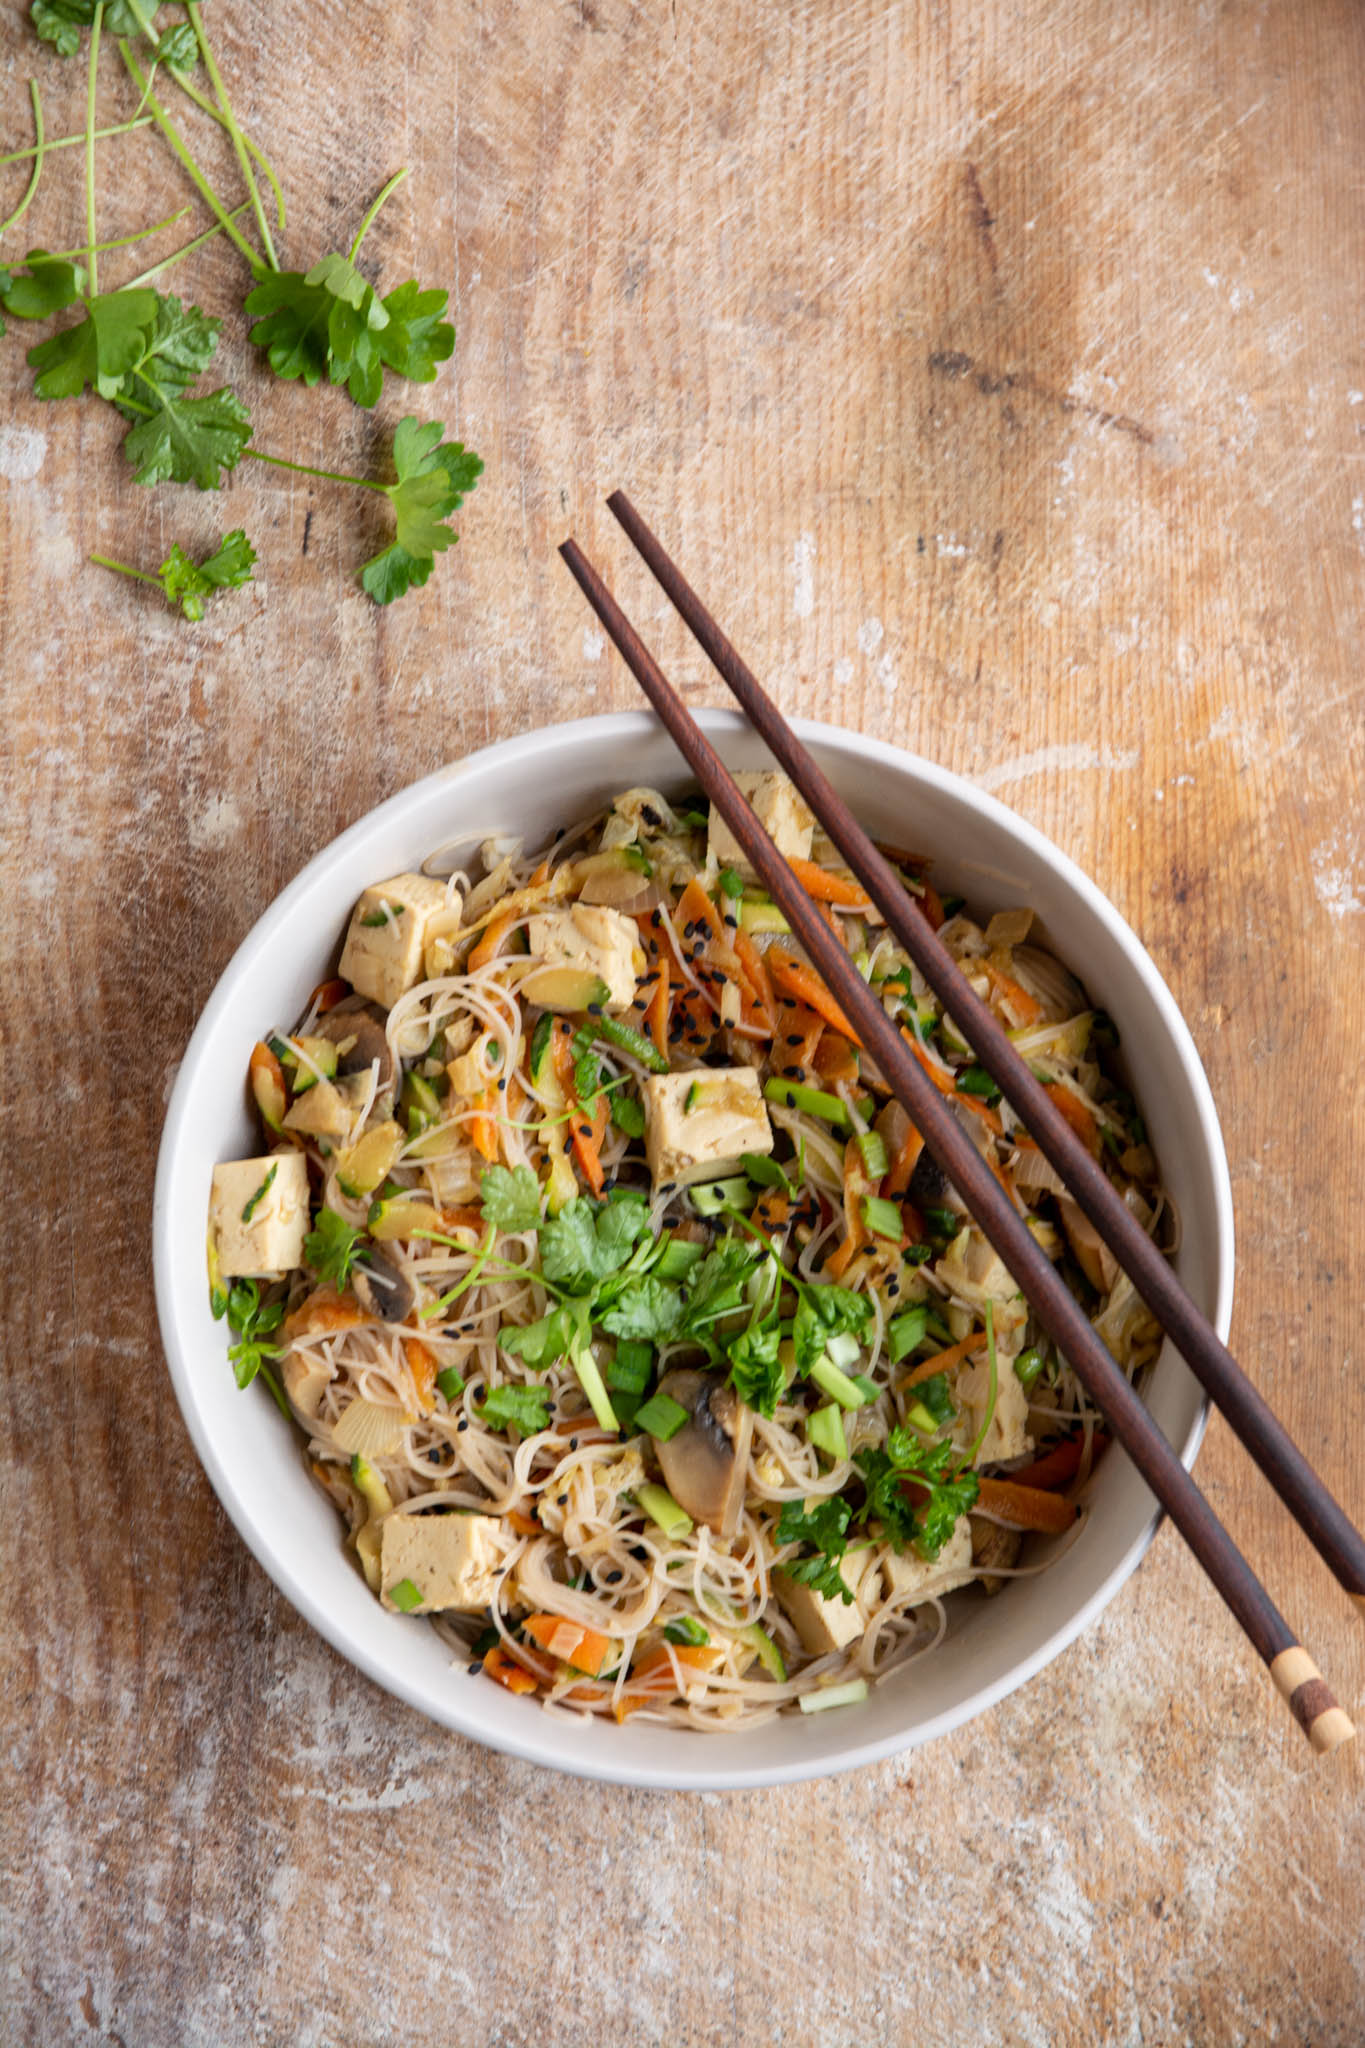 Try this healthy version of vegan pad thai that uses no oil or dairy products. It's a perfect weekday meal that'll fill you up.